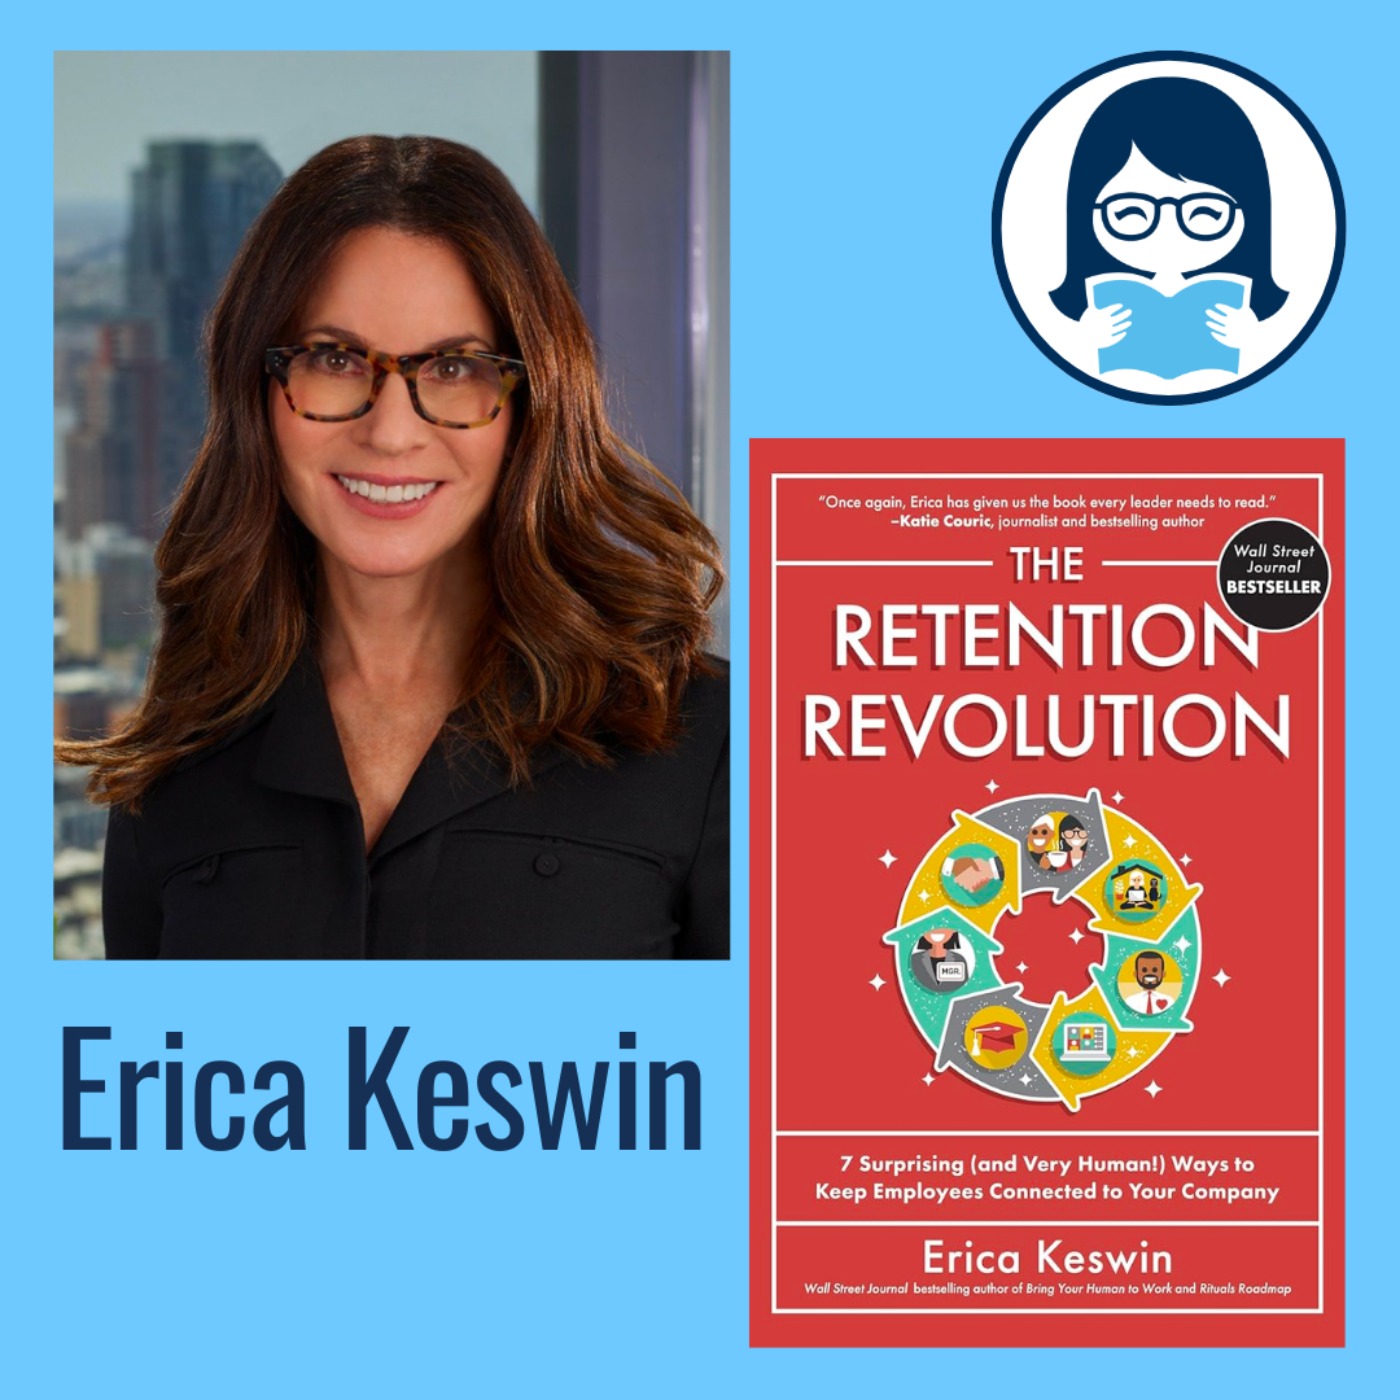 Erica Keswin, THE RETENTION REVOLUTION: 7 Surprising (and Very Human!) Ways to Keep Employees Connected to Your Company